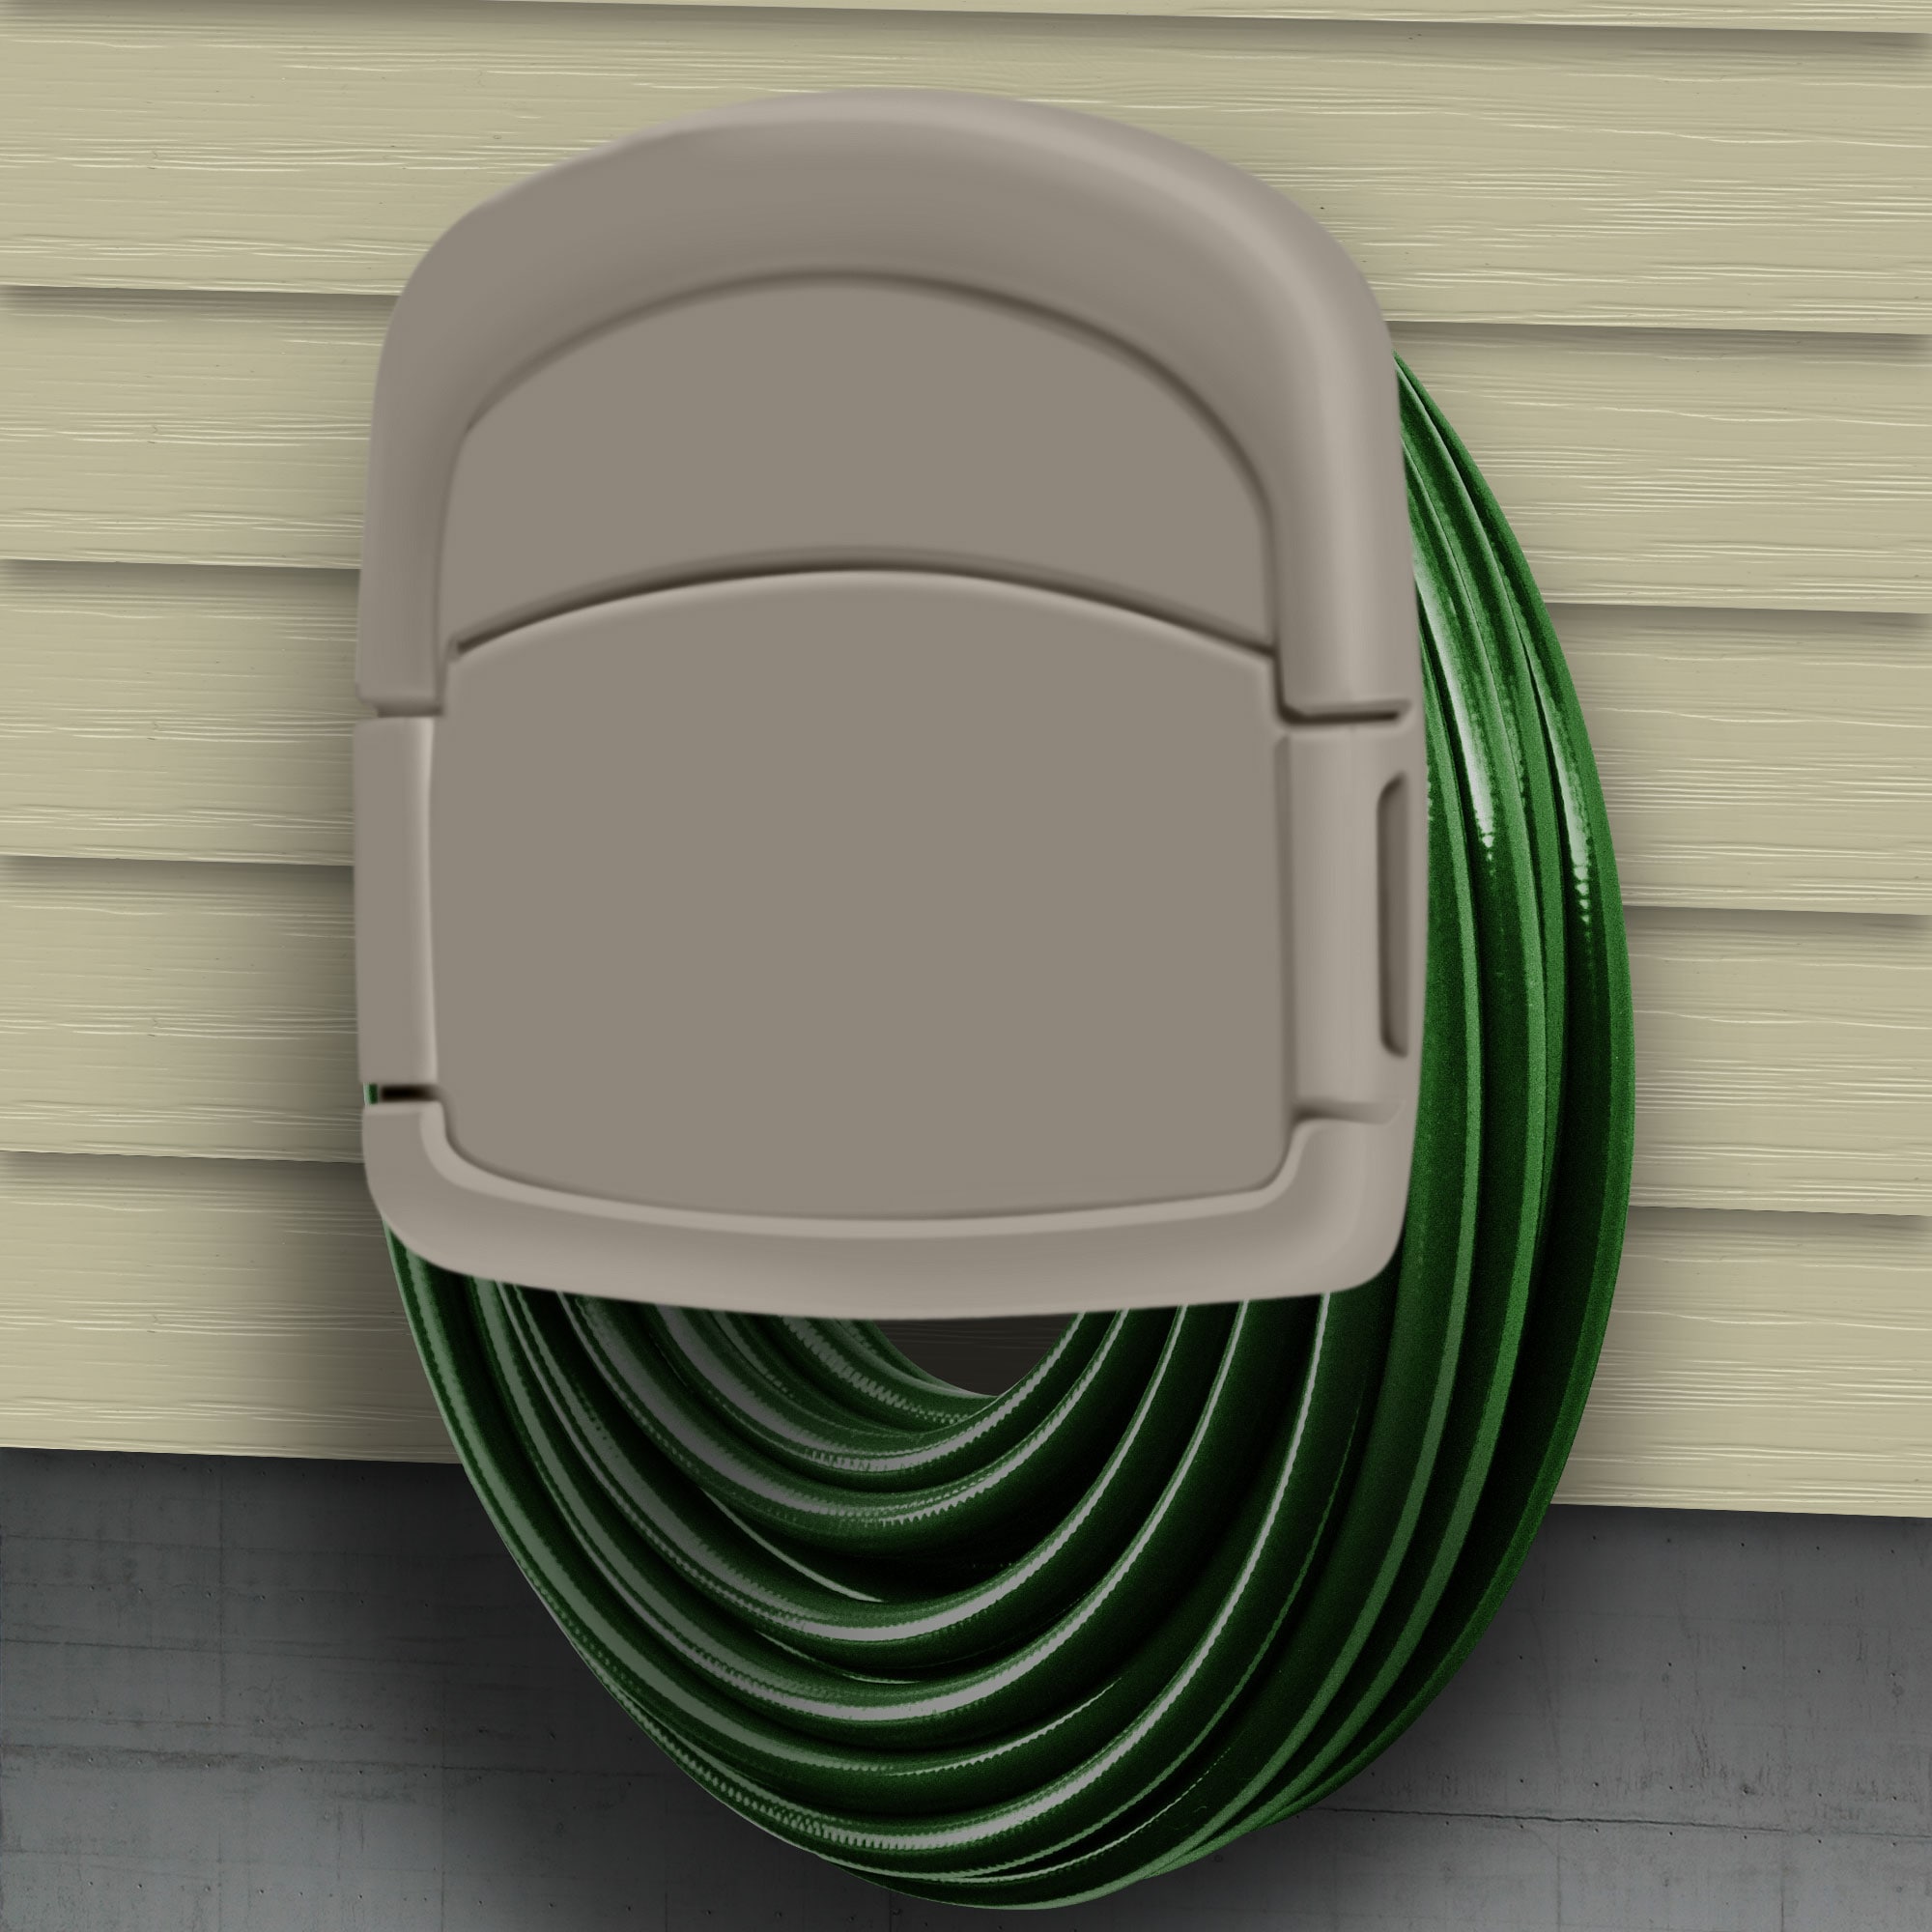 150 FT WALL Mounted Plastic Garden Hose Reel With Storage Box